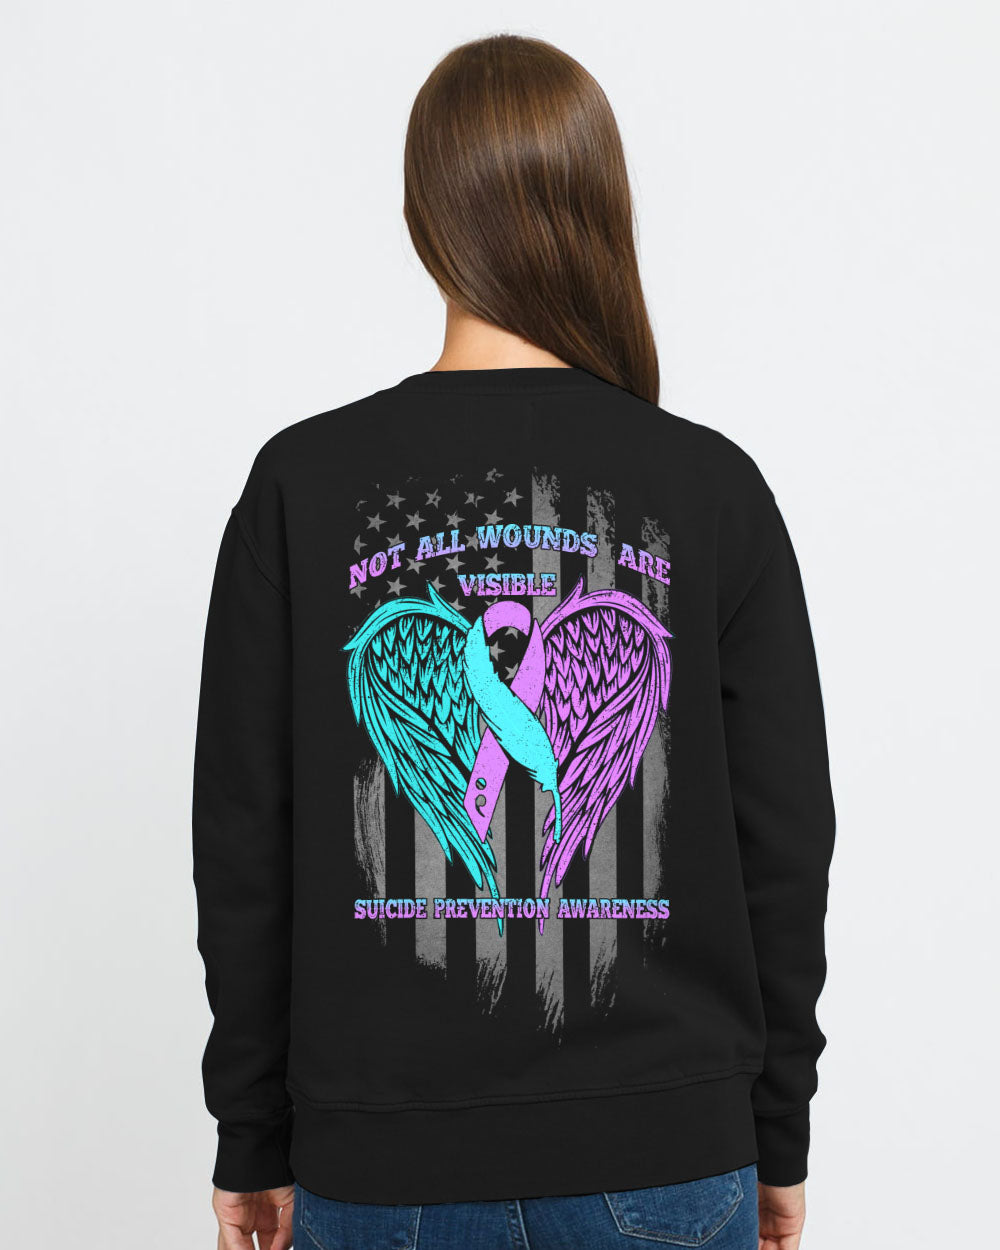 Not All Wounds Are Visible Women's Suicide Prevention Awareness Sweatshirt